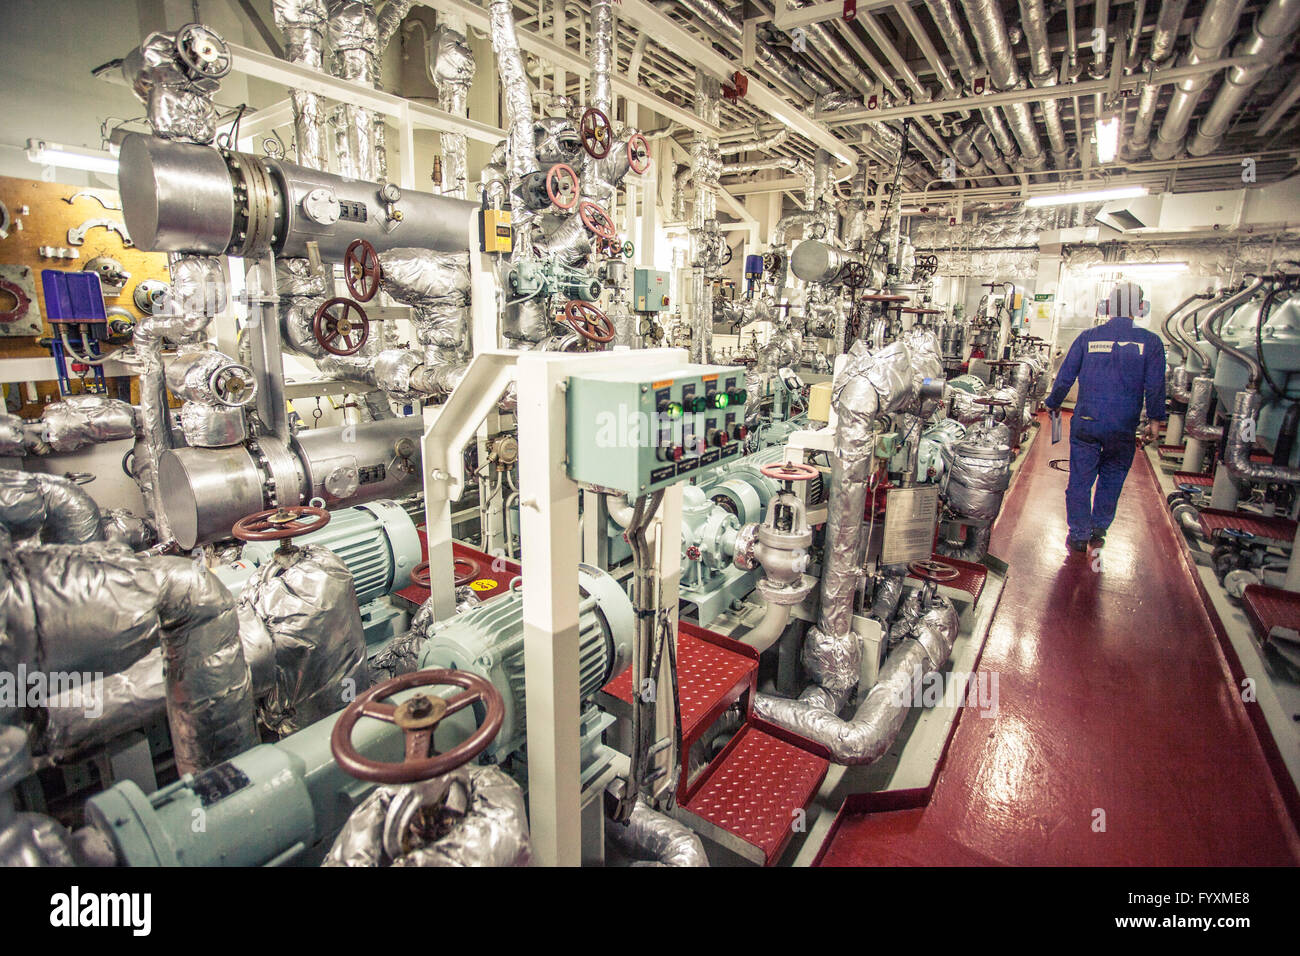 Chief engineer of a container ship walking through a room with generators and life support systems. Stock Photo